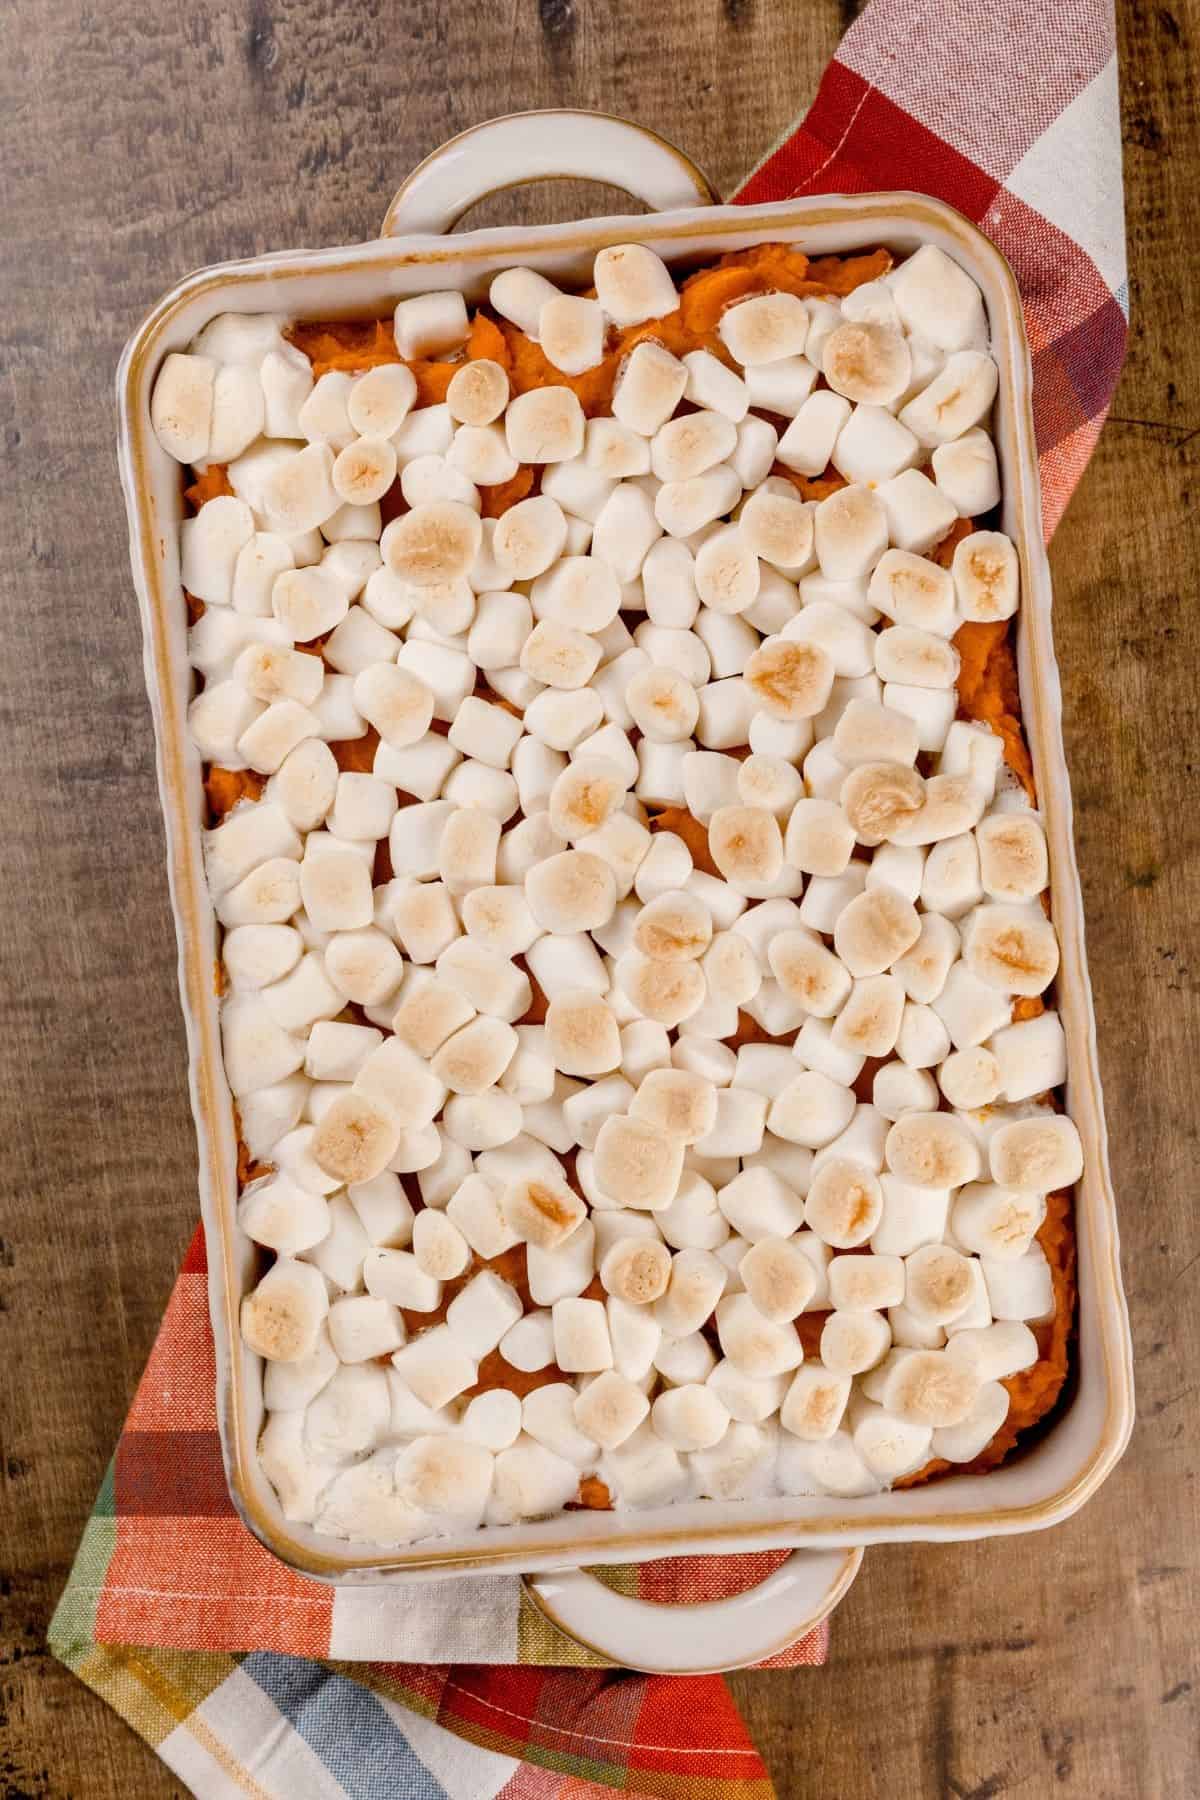 rectangle baking dish filled with sweet potatoes and covered in toasted mini marshmallows. an autumnal towel is under the dish and it is resting on a wood table.